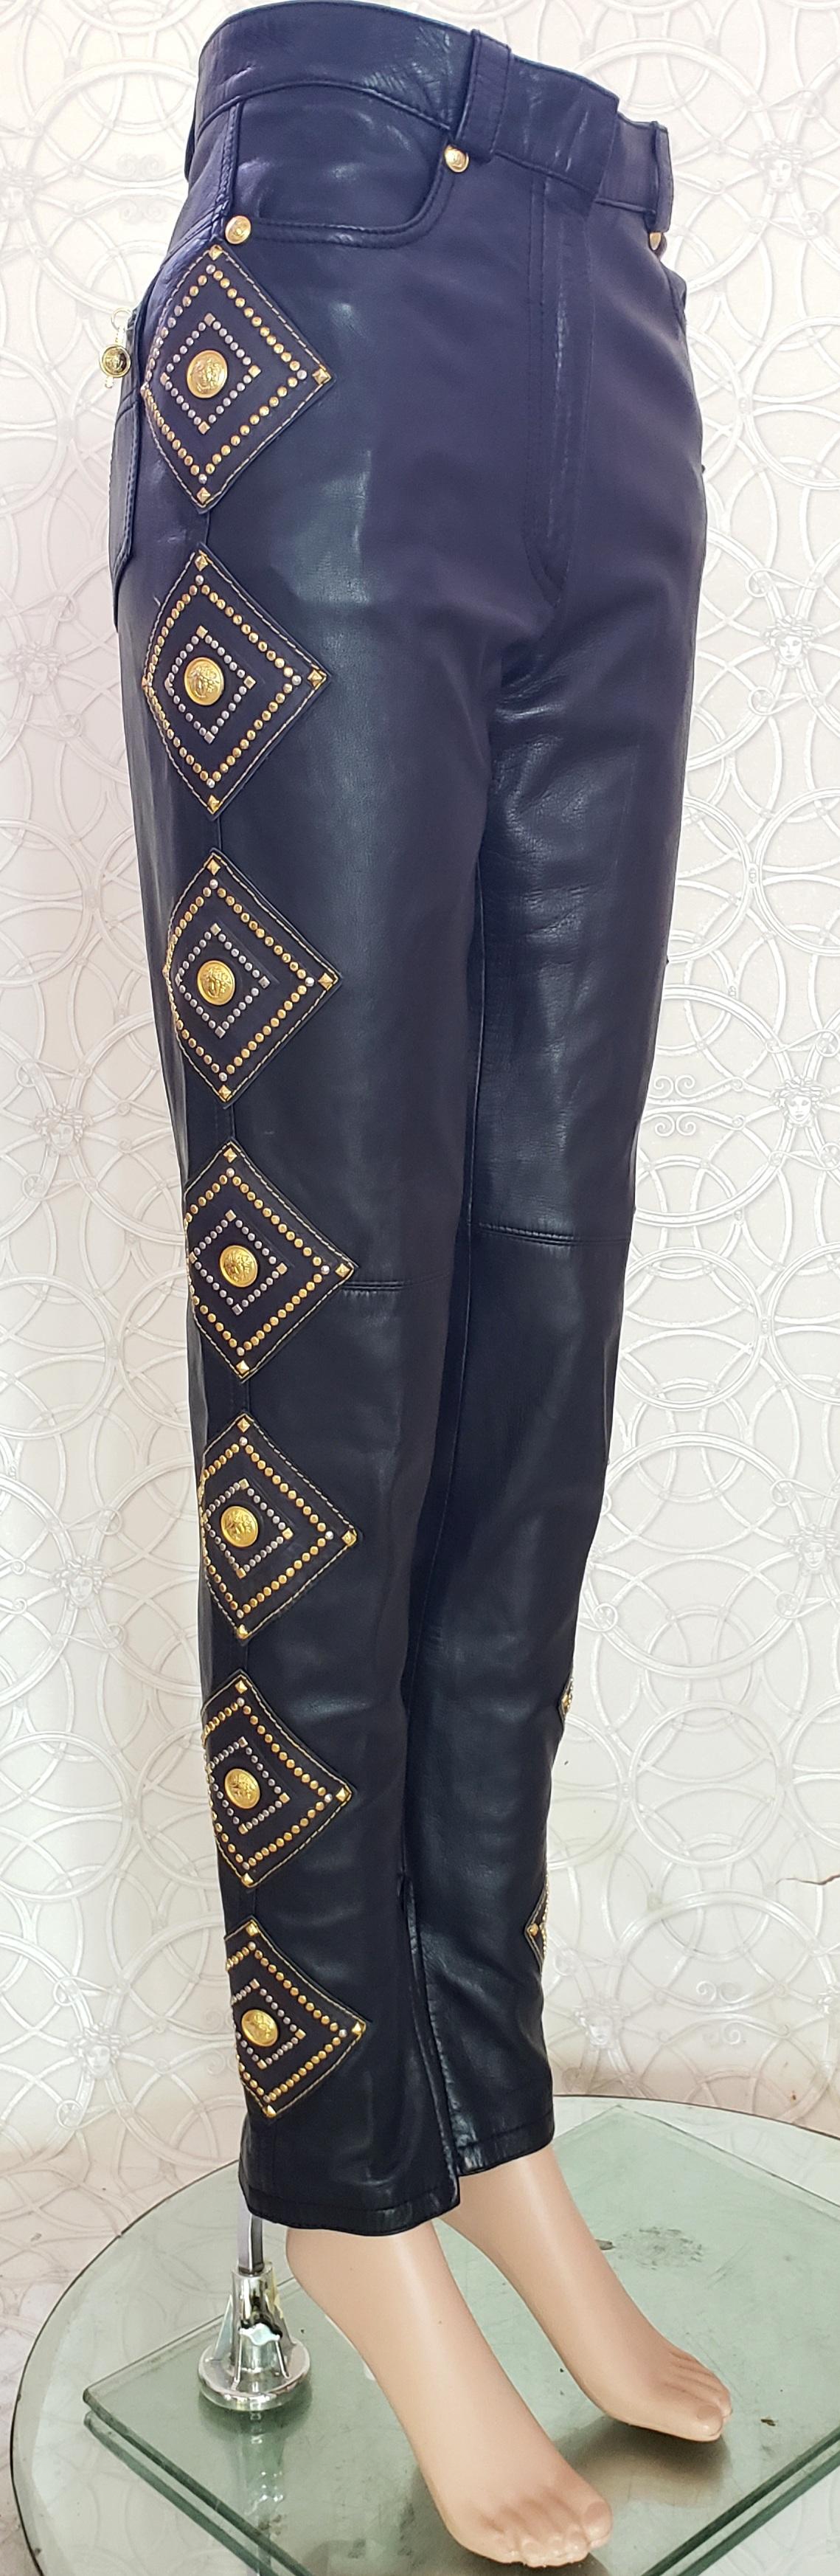 1991 GIANNI VERSACE PRIVATE MUSEUM WORTHY COLLECTION BLACK LEATHER STUDDED Pants For Sale 5